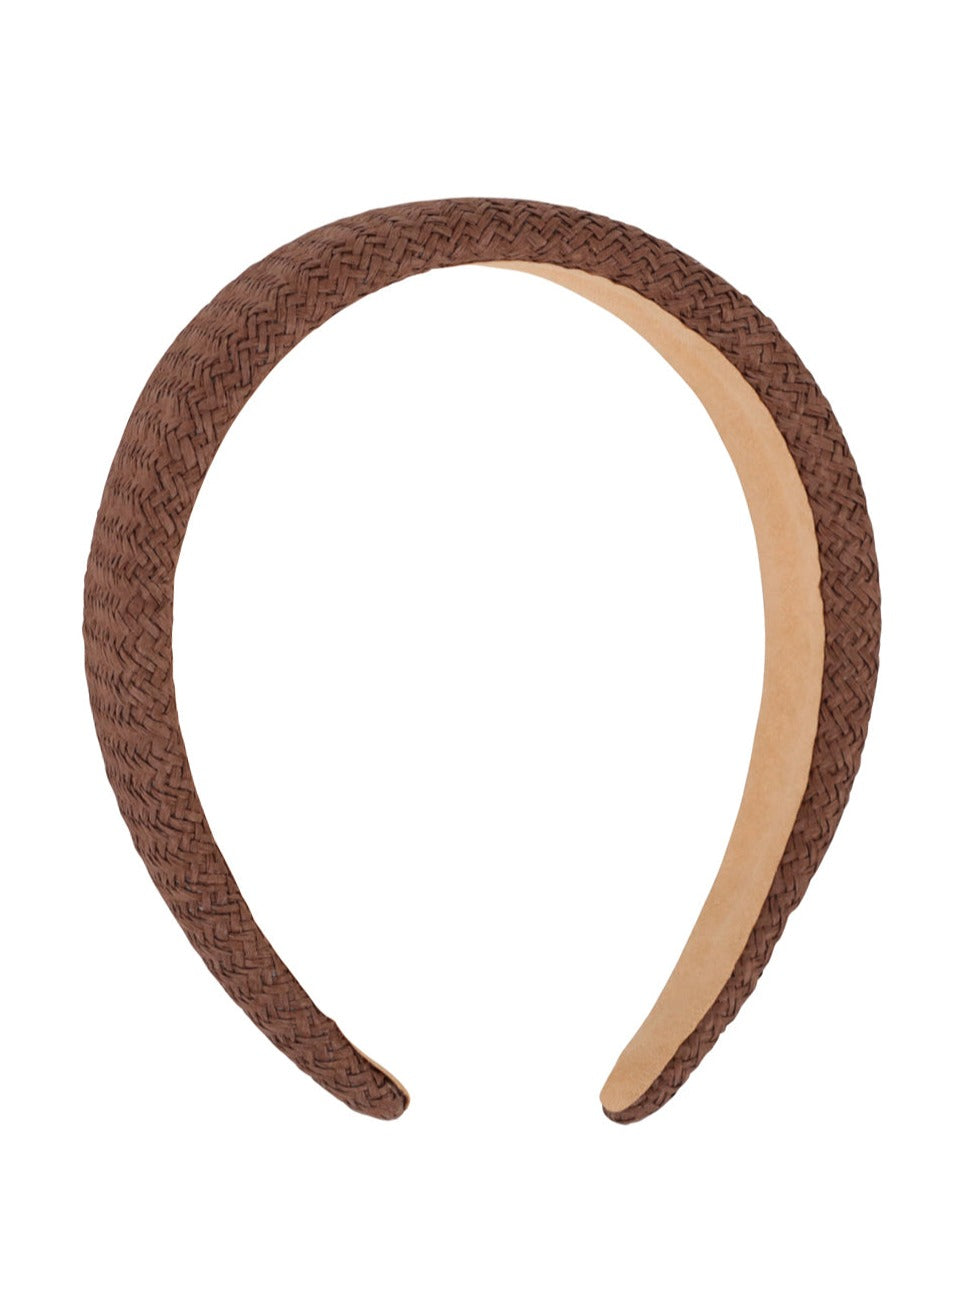 Woven Rounded Headband in Brown | Summer | Hair | Wedding Guest | Occasion | Hair Accessories | Women's Accessories | Women |